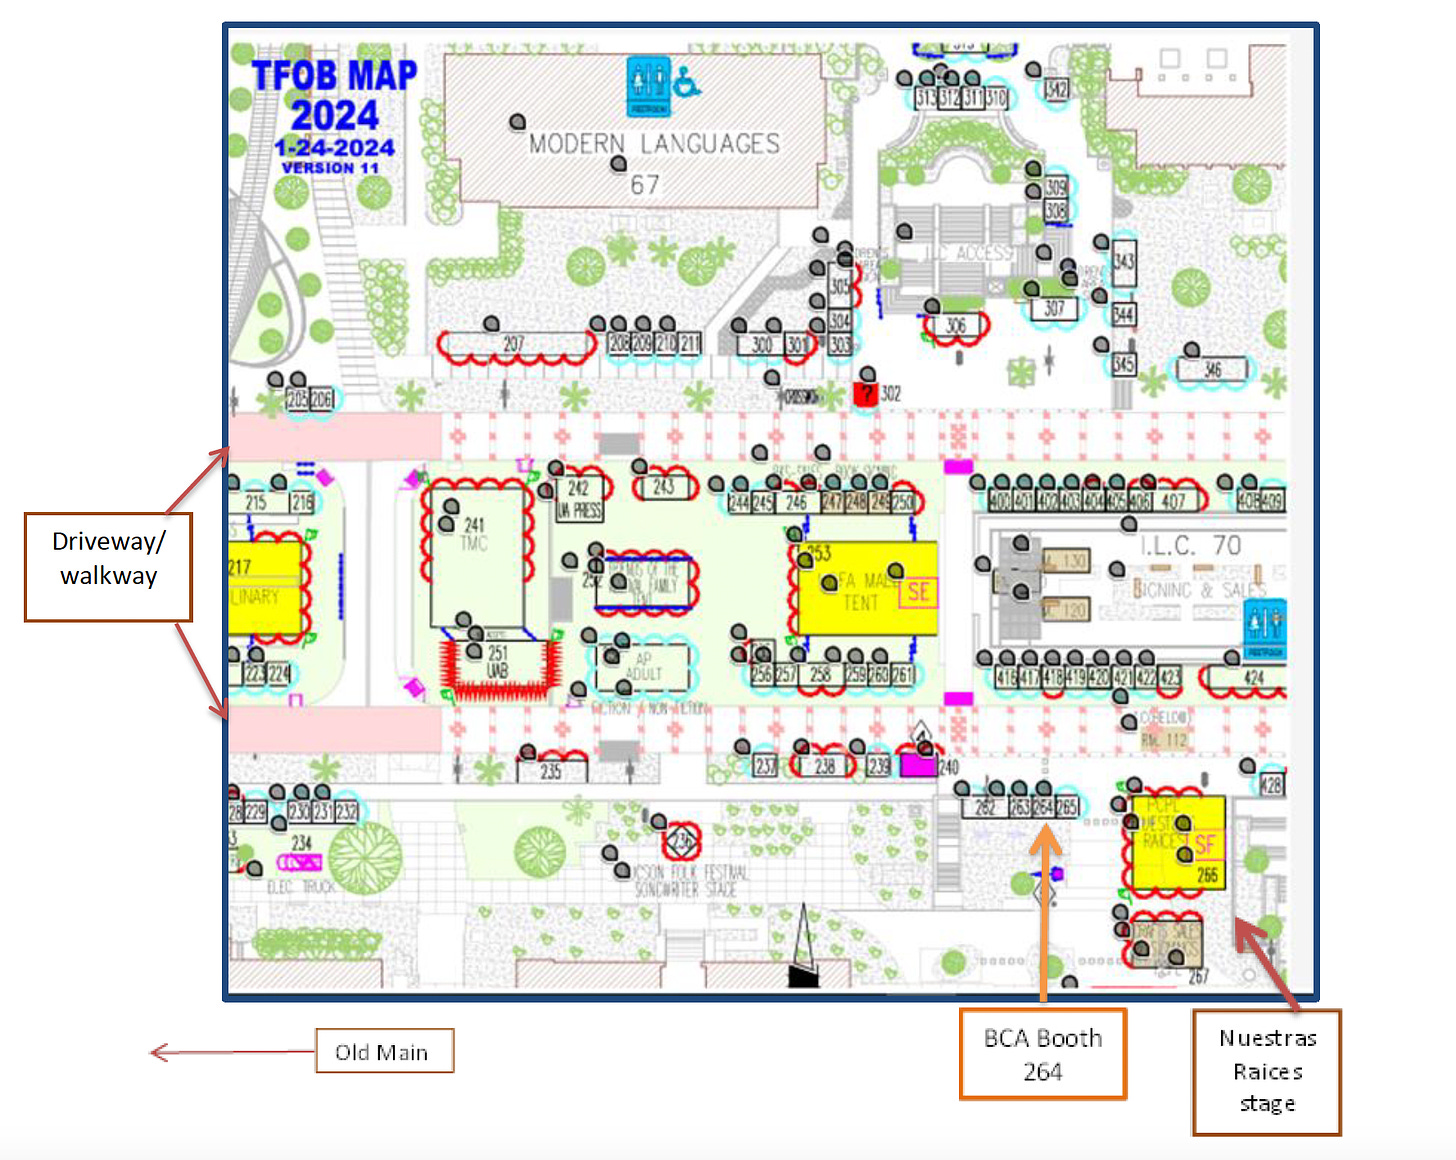 Map of the Tucson Festival books panel location and signing area.